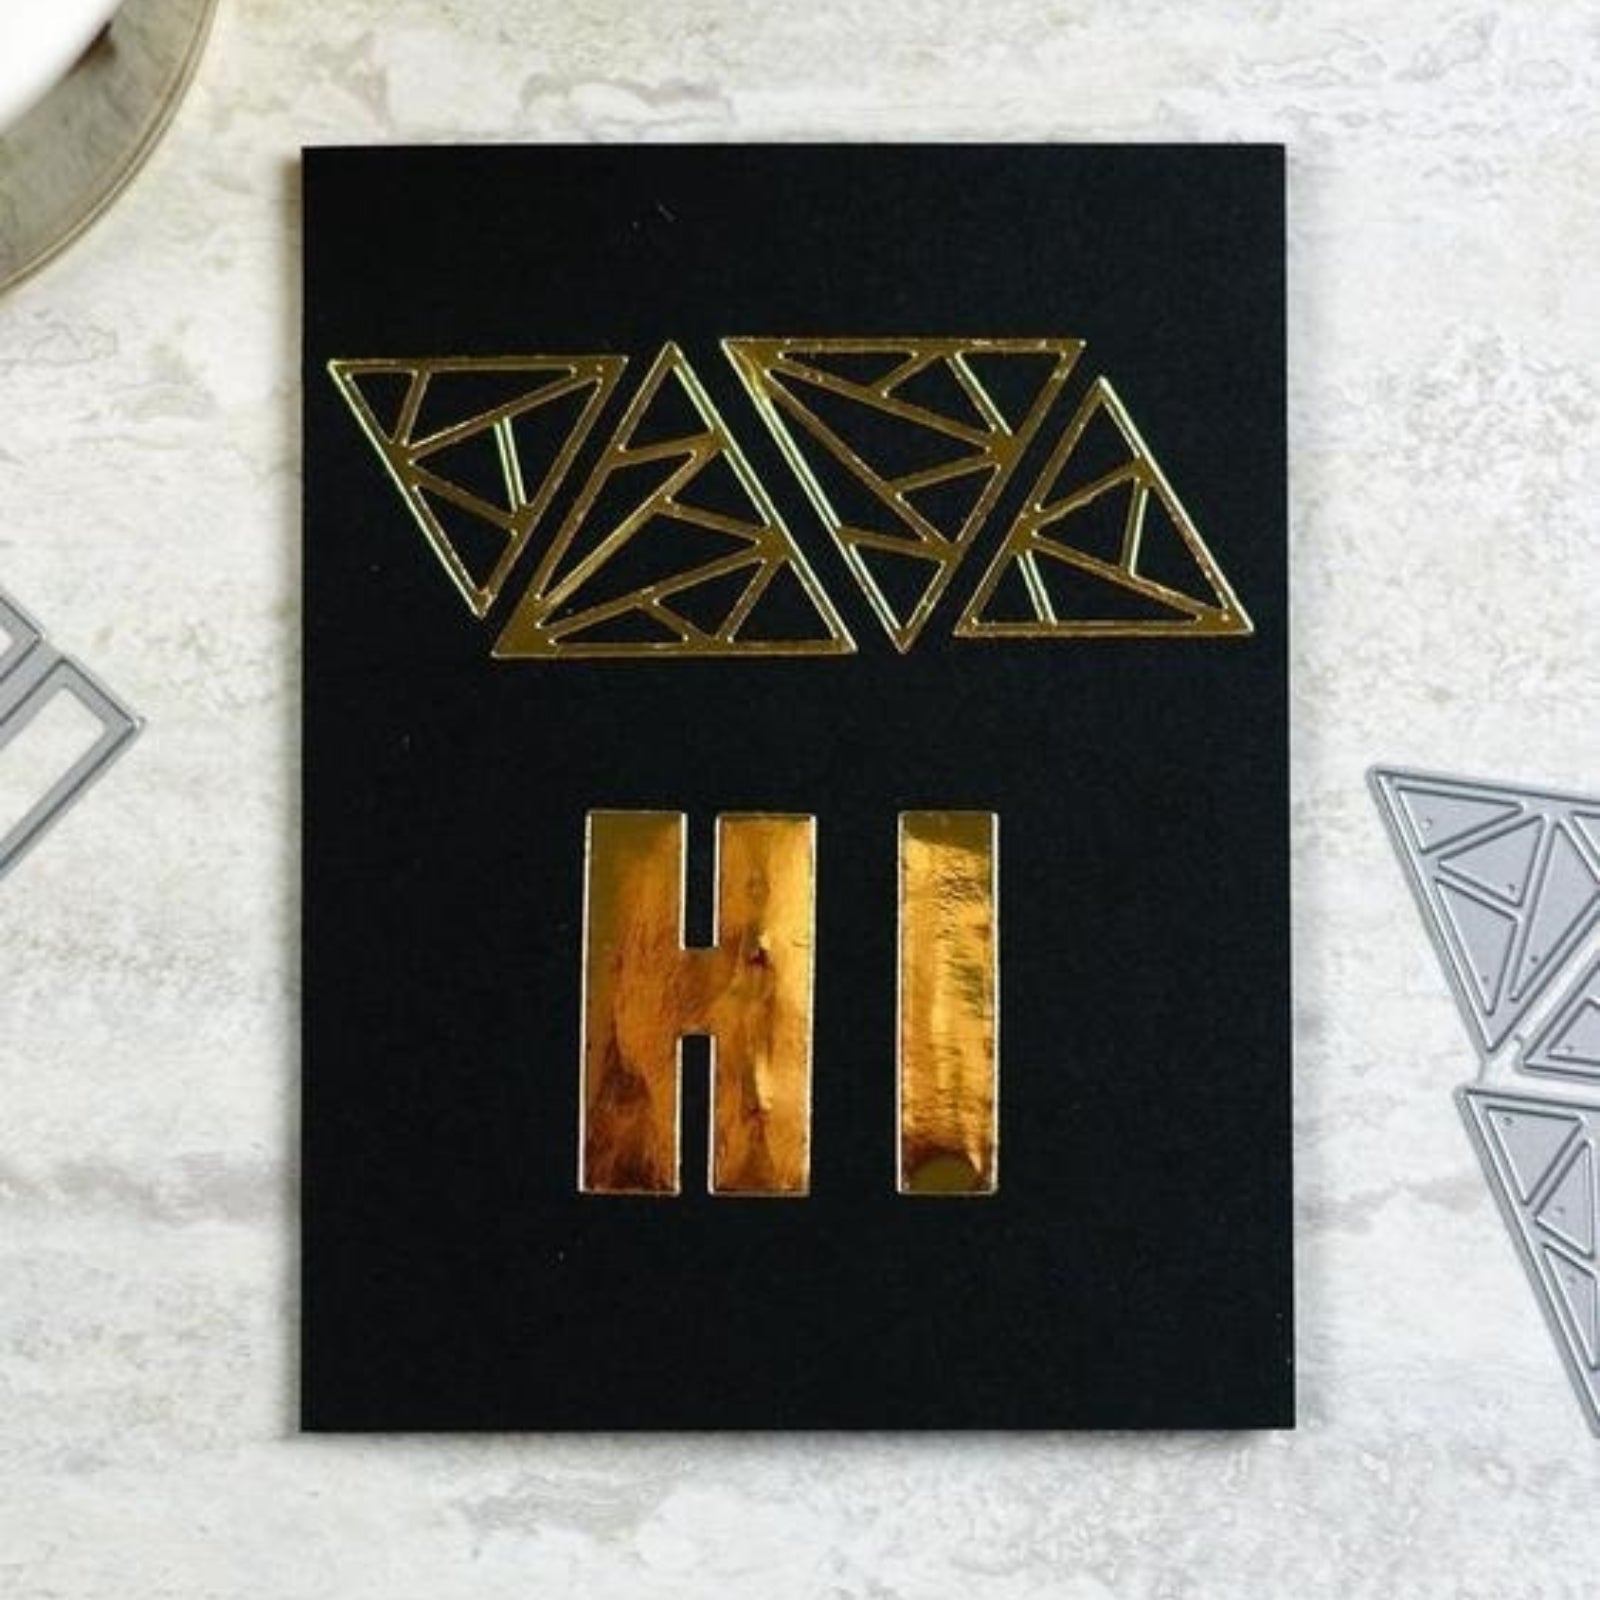 Stained Glass Triangles Cutting Dies Set